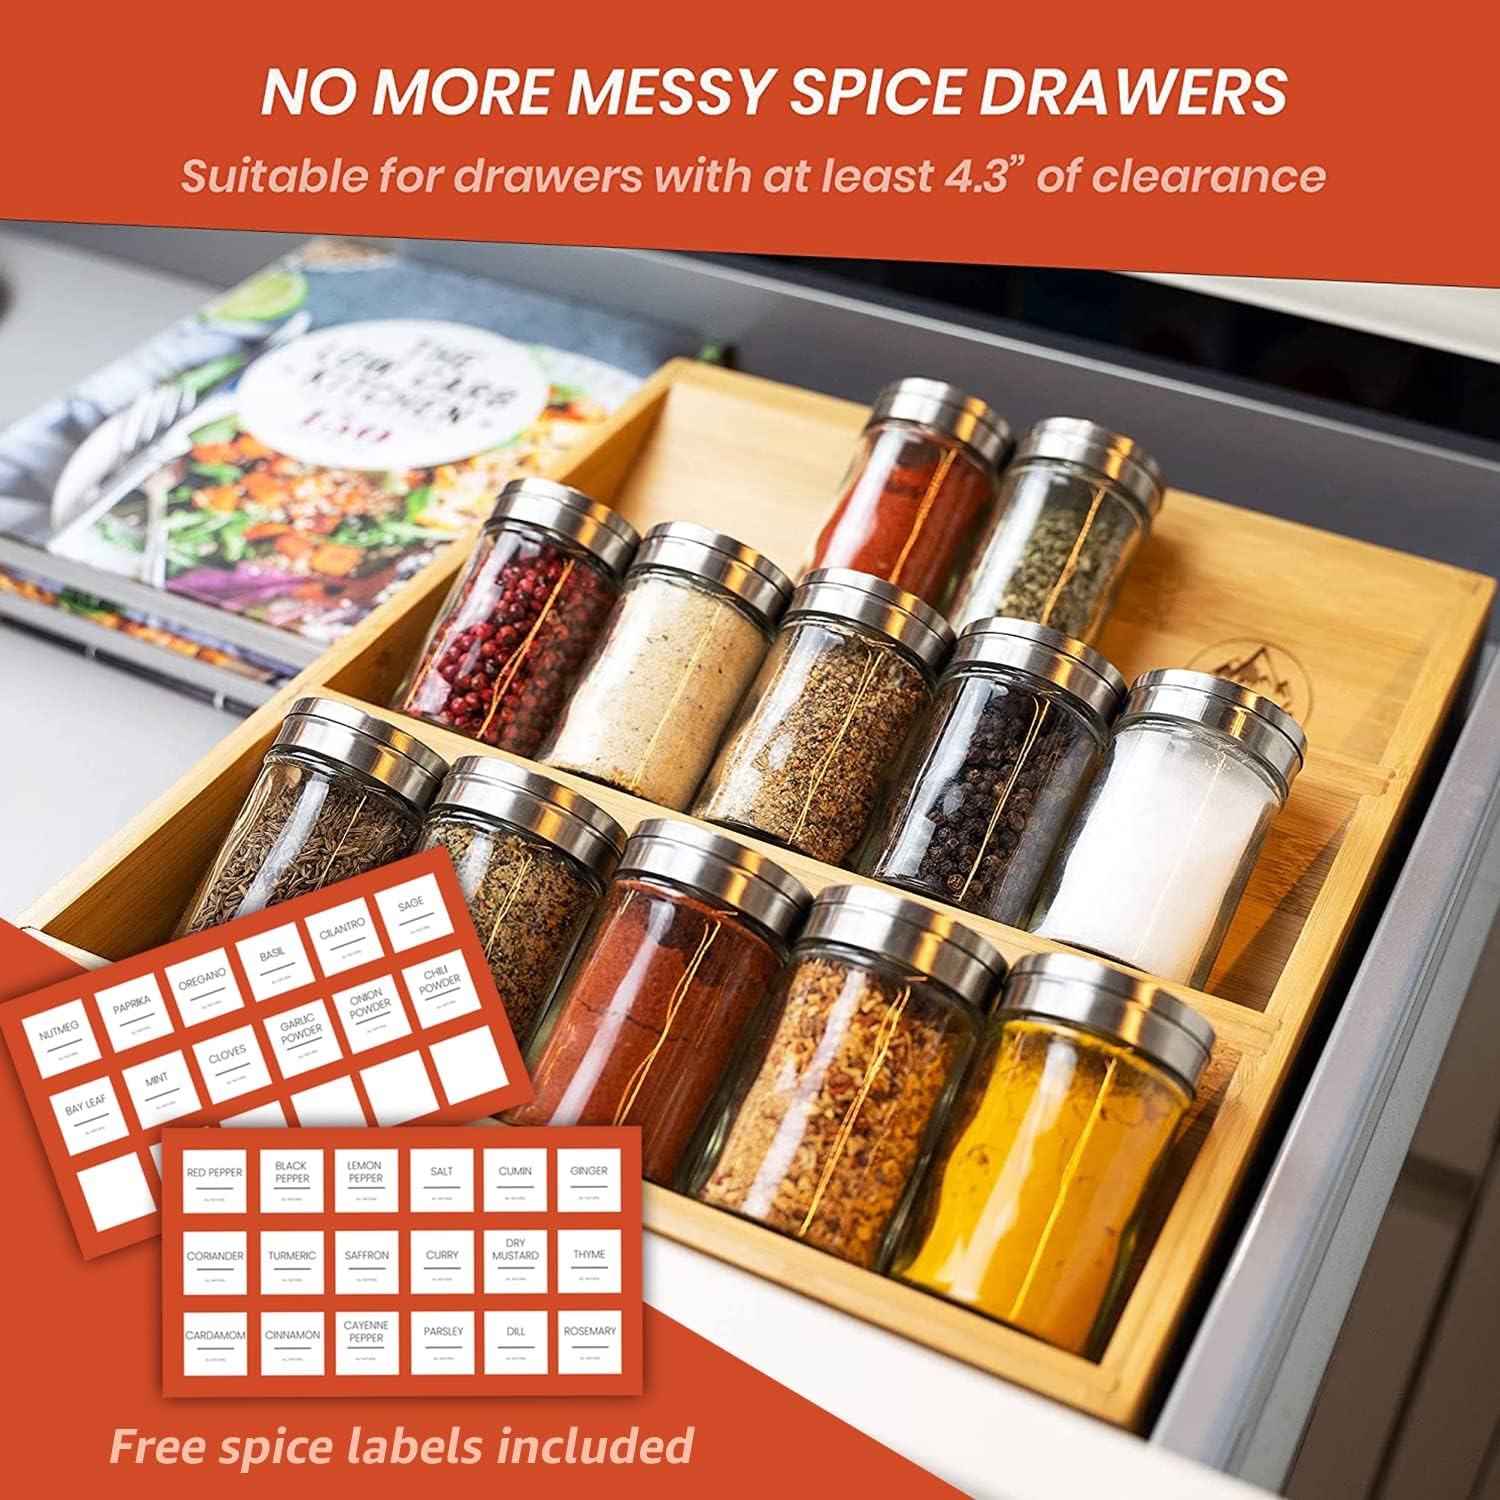 Clear & Easy 3-Tier Bamboo Spice Rack For Countertop $19.99 (reg $35)